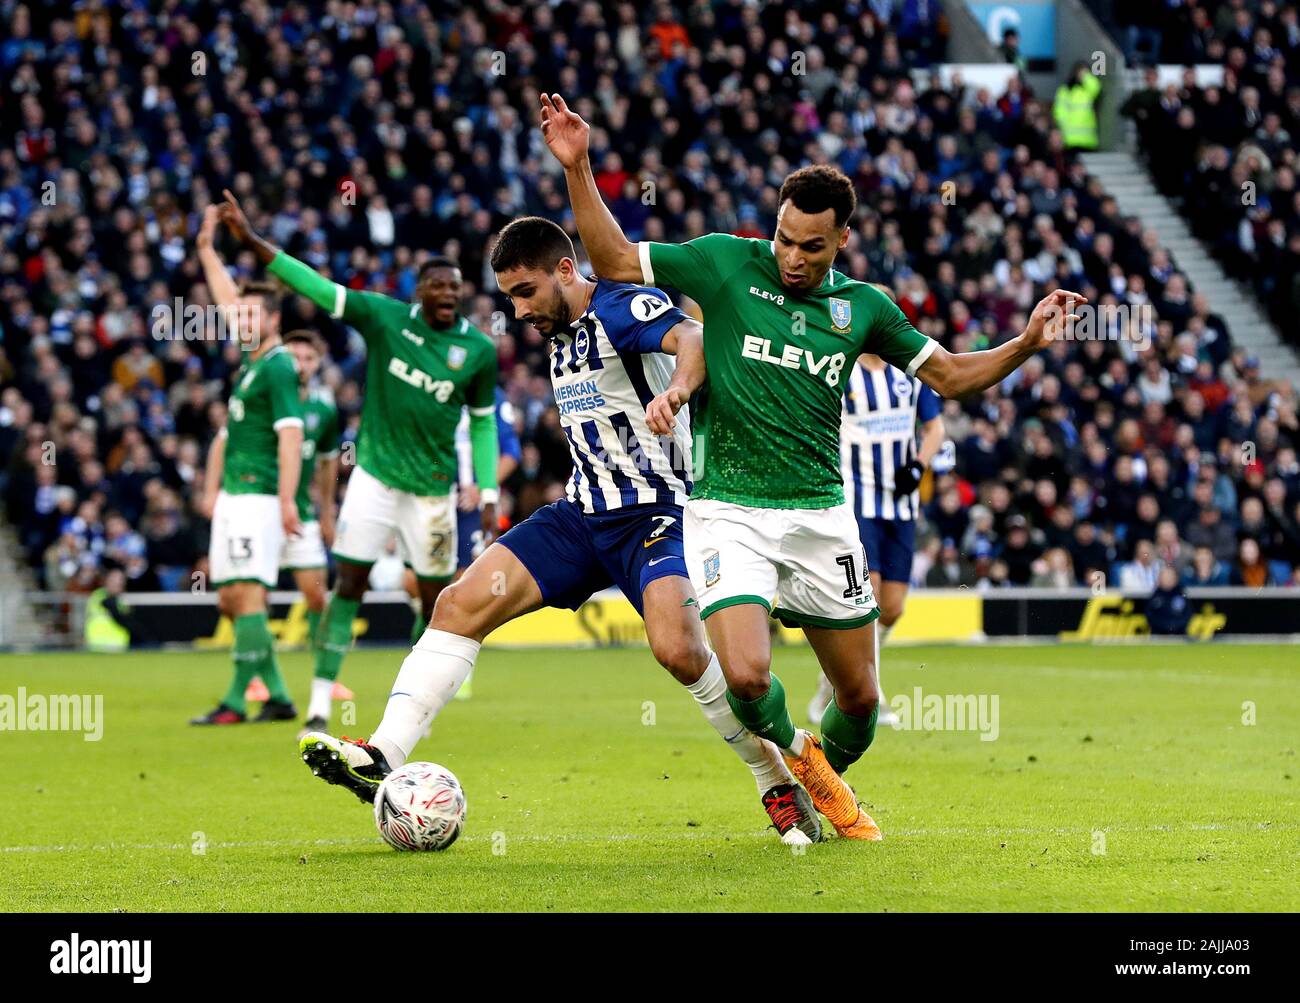 Brighton and Hove Albion's Neal Maupay (left) and Sheffield Wednesday's Jacob Murphy (right) battle for the ball during the FA Cup third round match at the AMEX Stadium, Brighton. Stock Photo